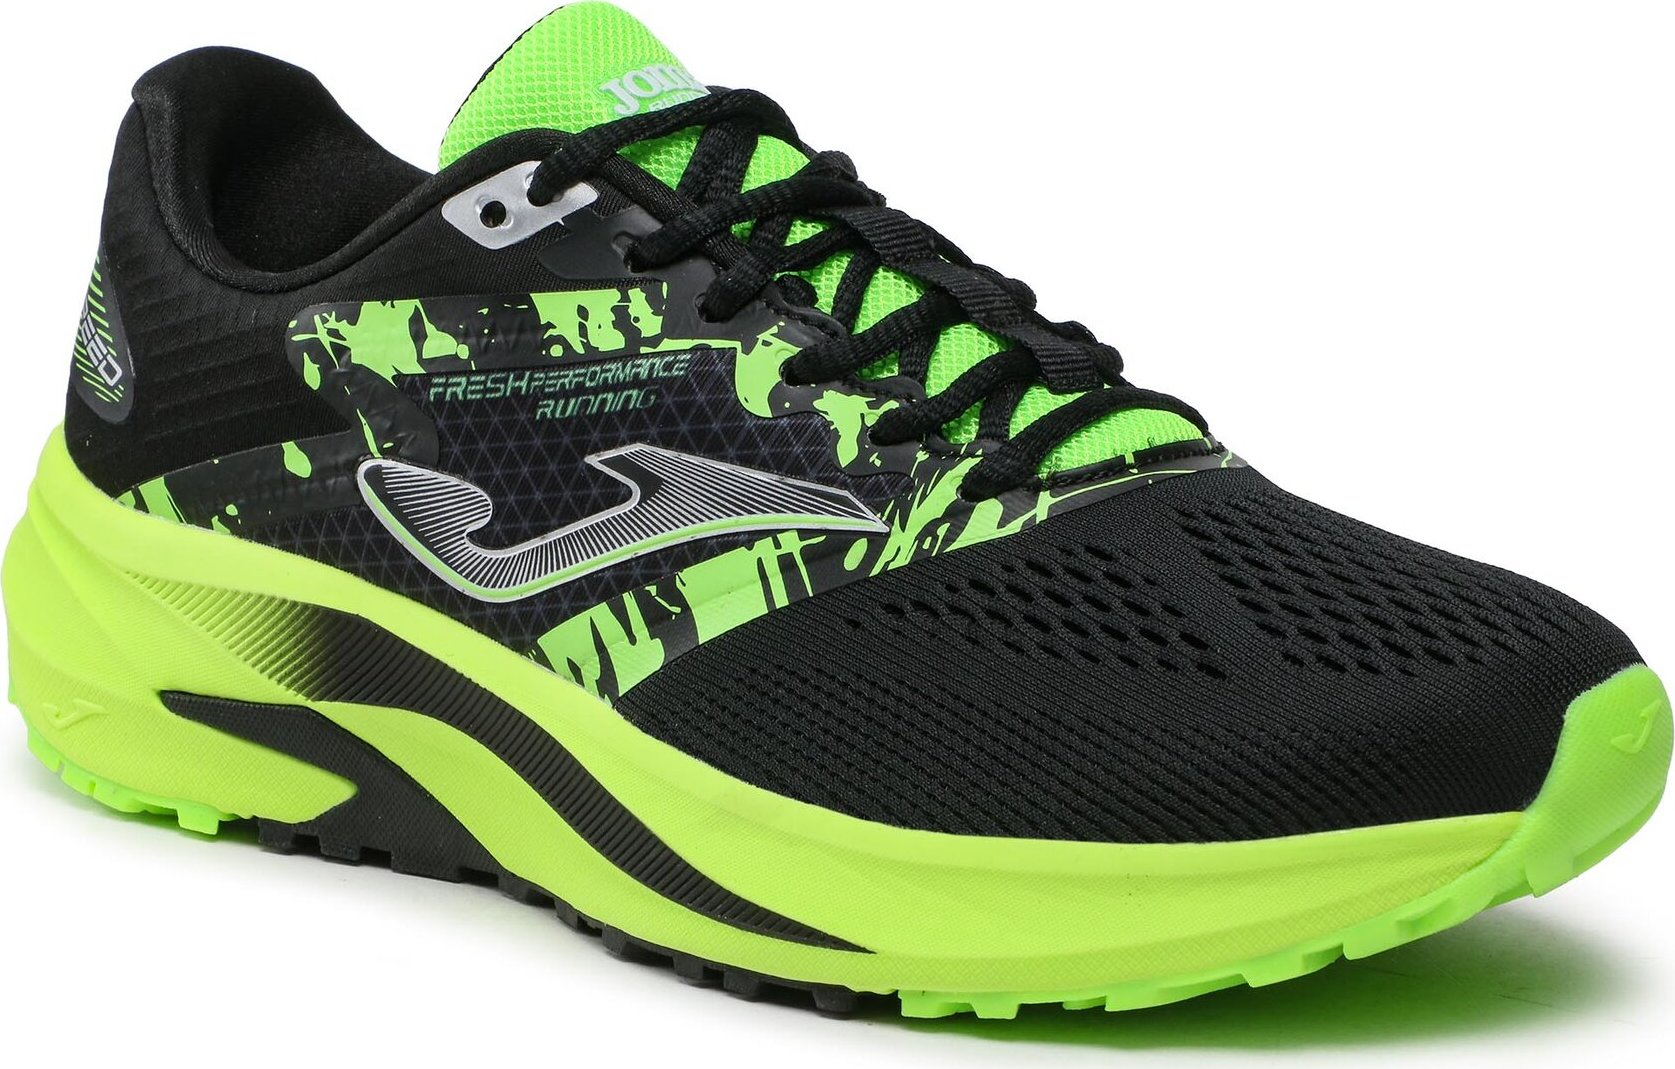 Boty Joma R.Speed 2301 RSPEES2301 Black/Fluor/Green